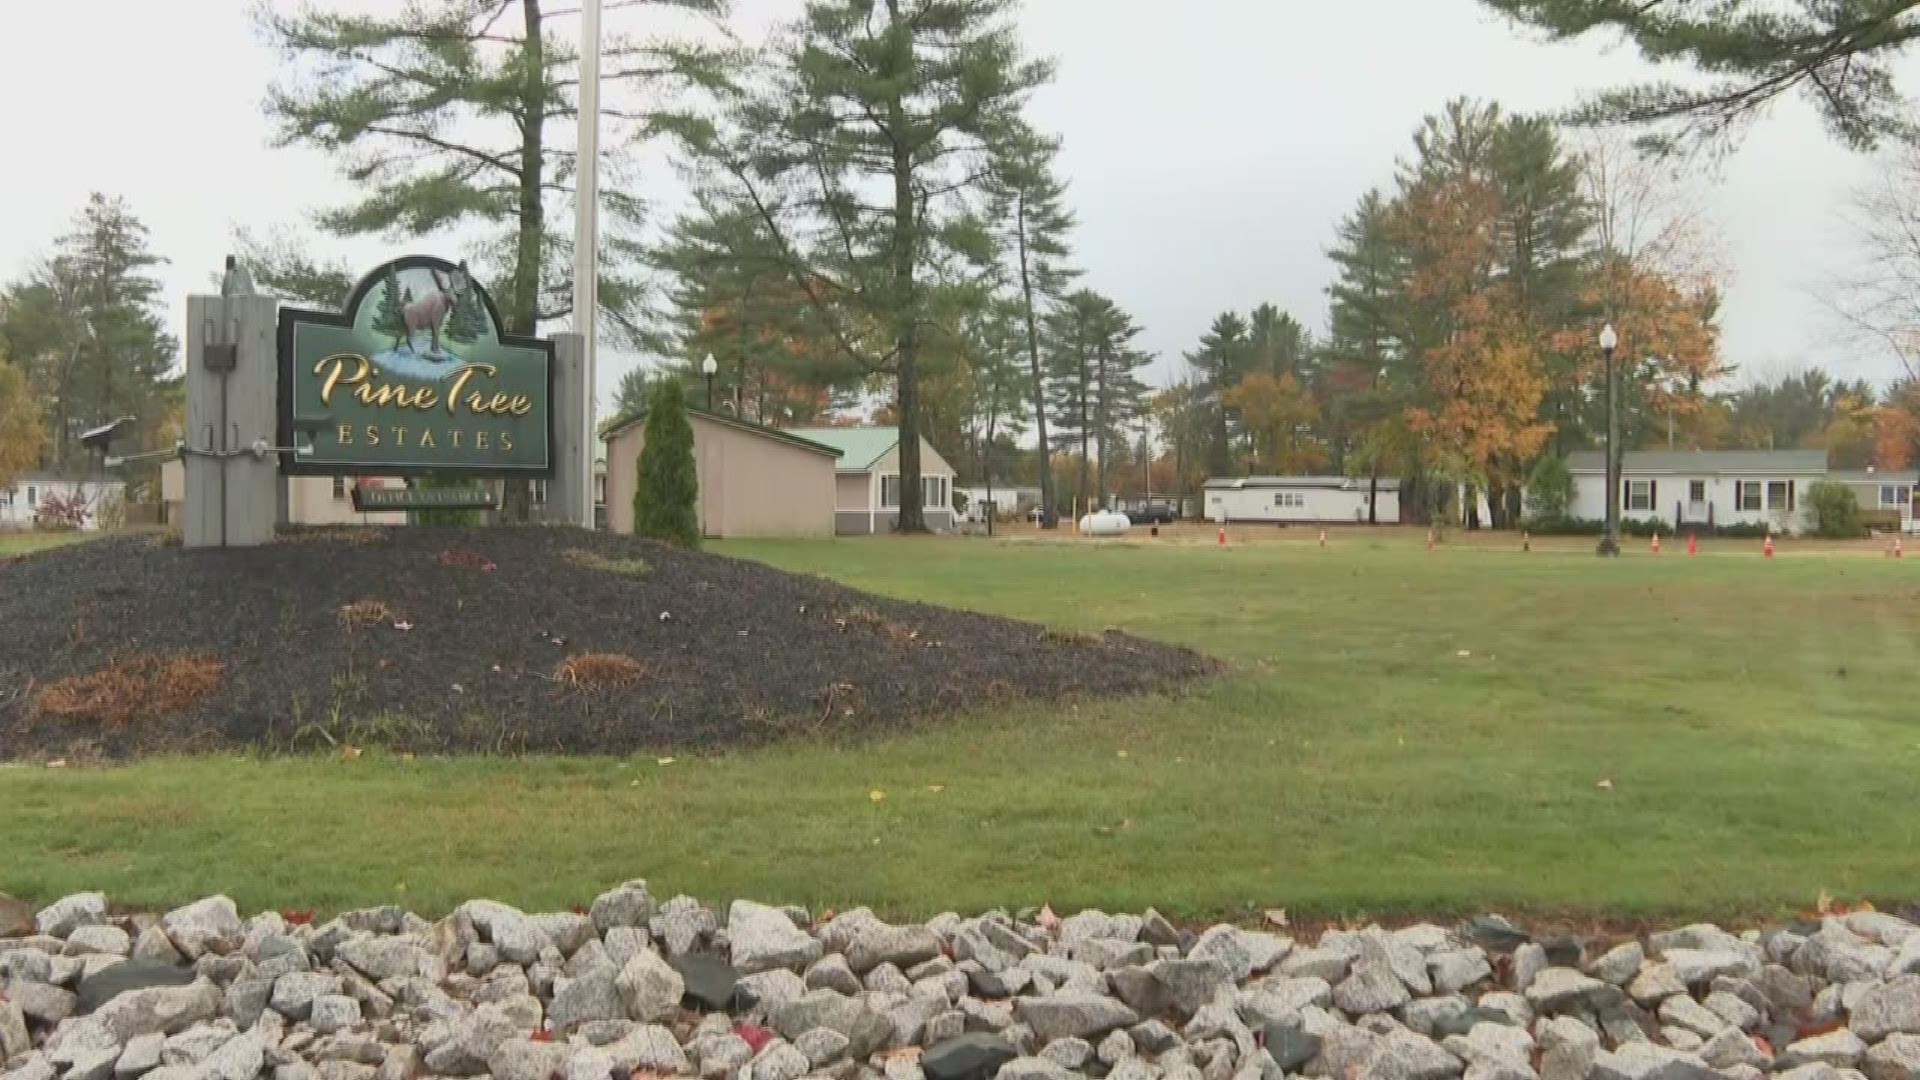 Trailer park to 'embarrass' residents about late rent.